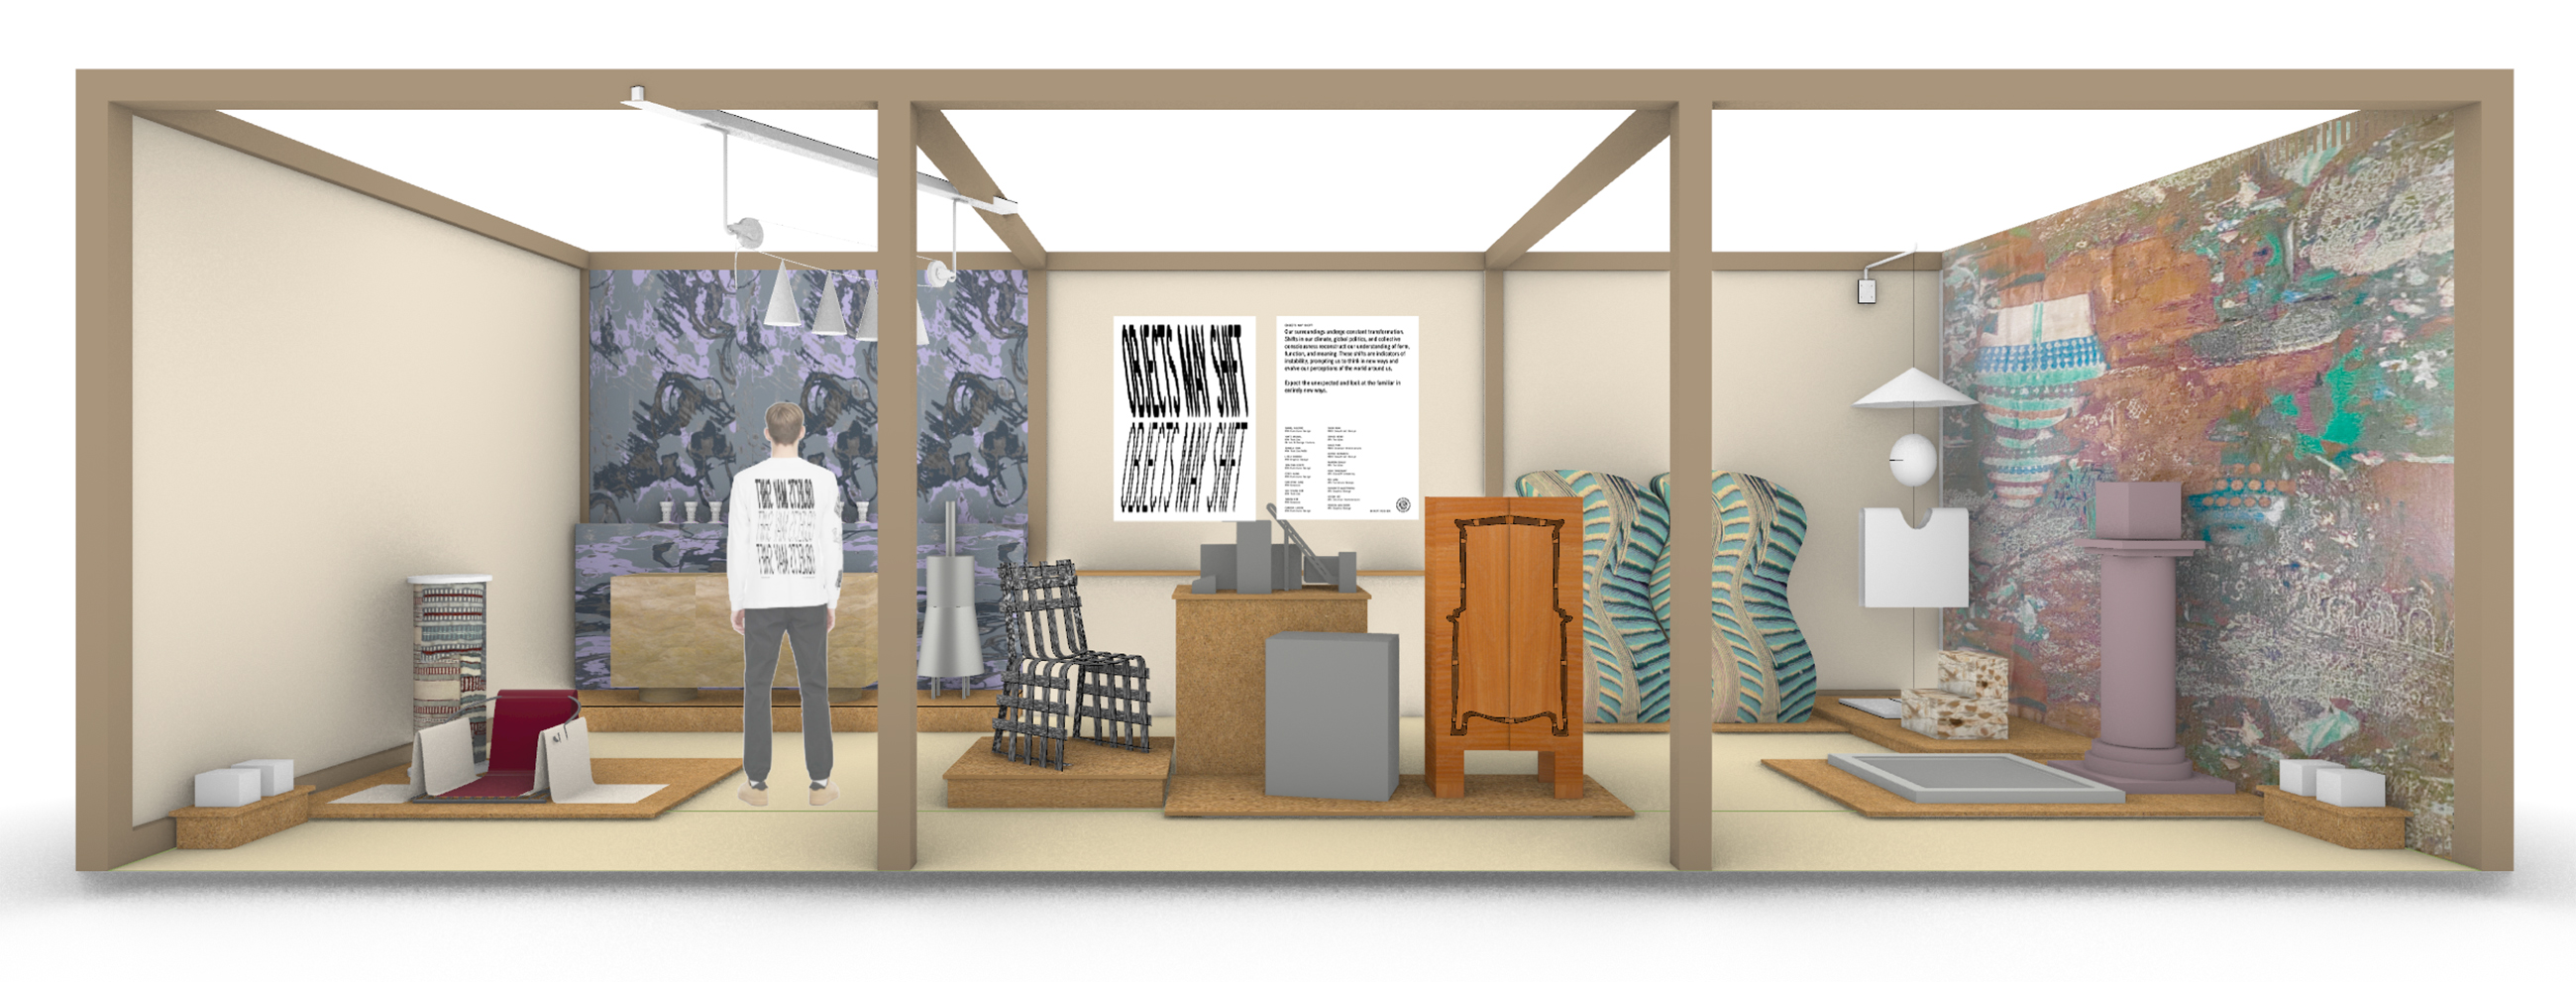 Rendering of the Objects May shift Booth Design 